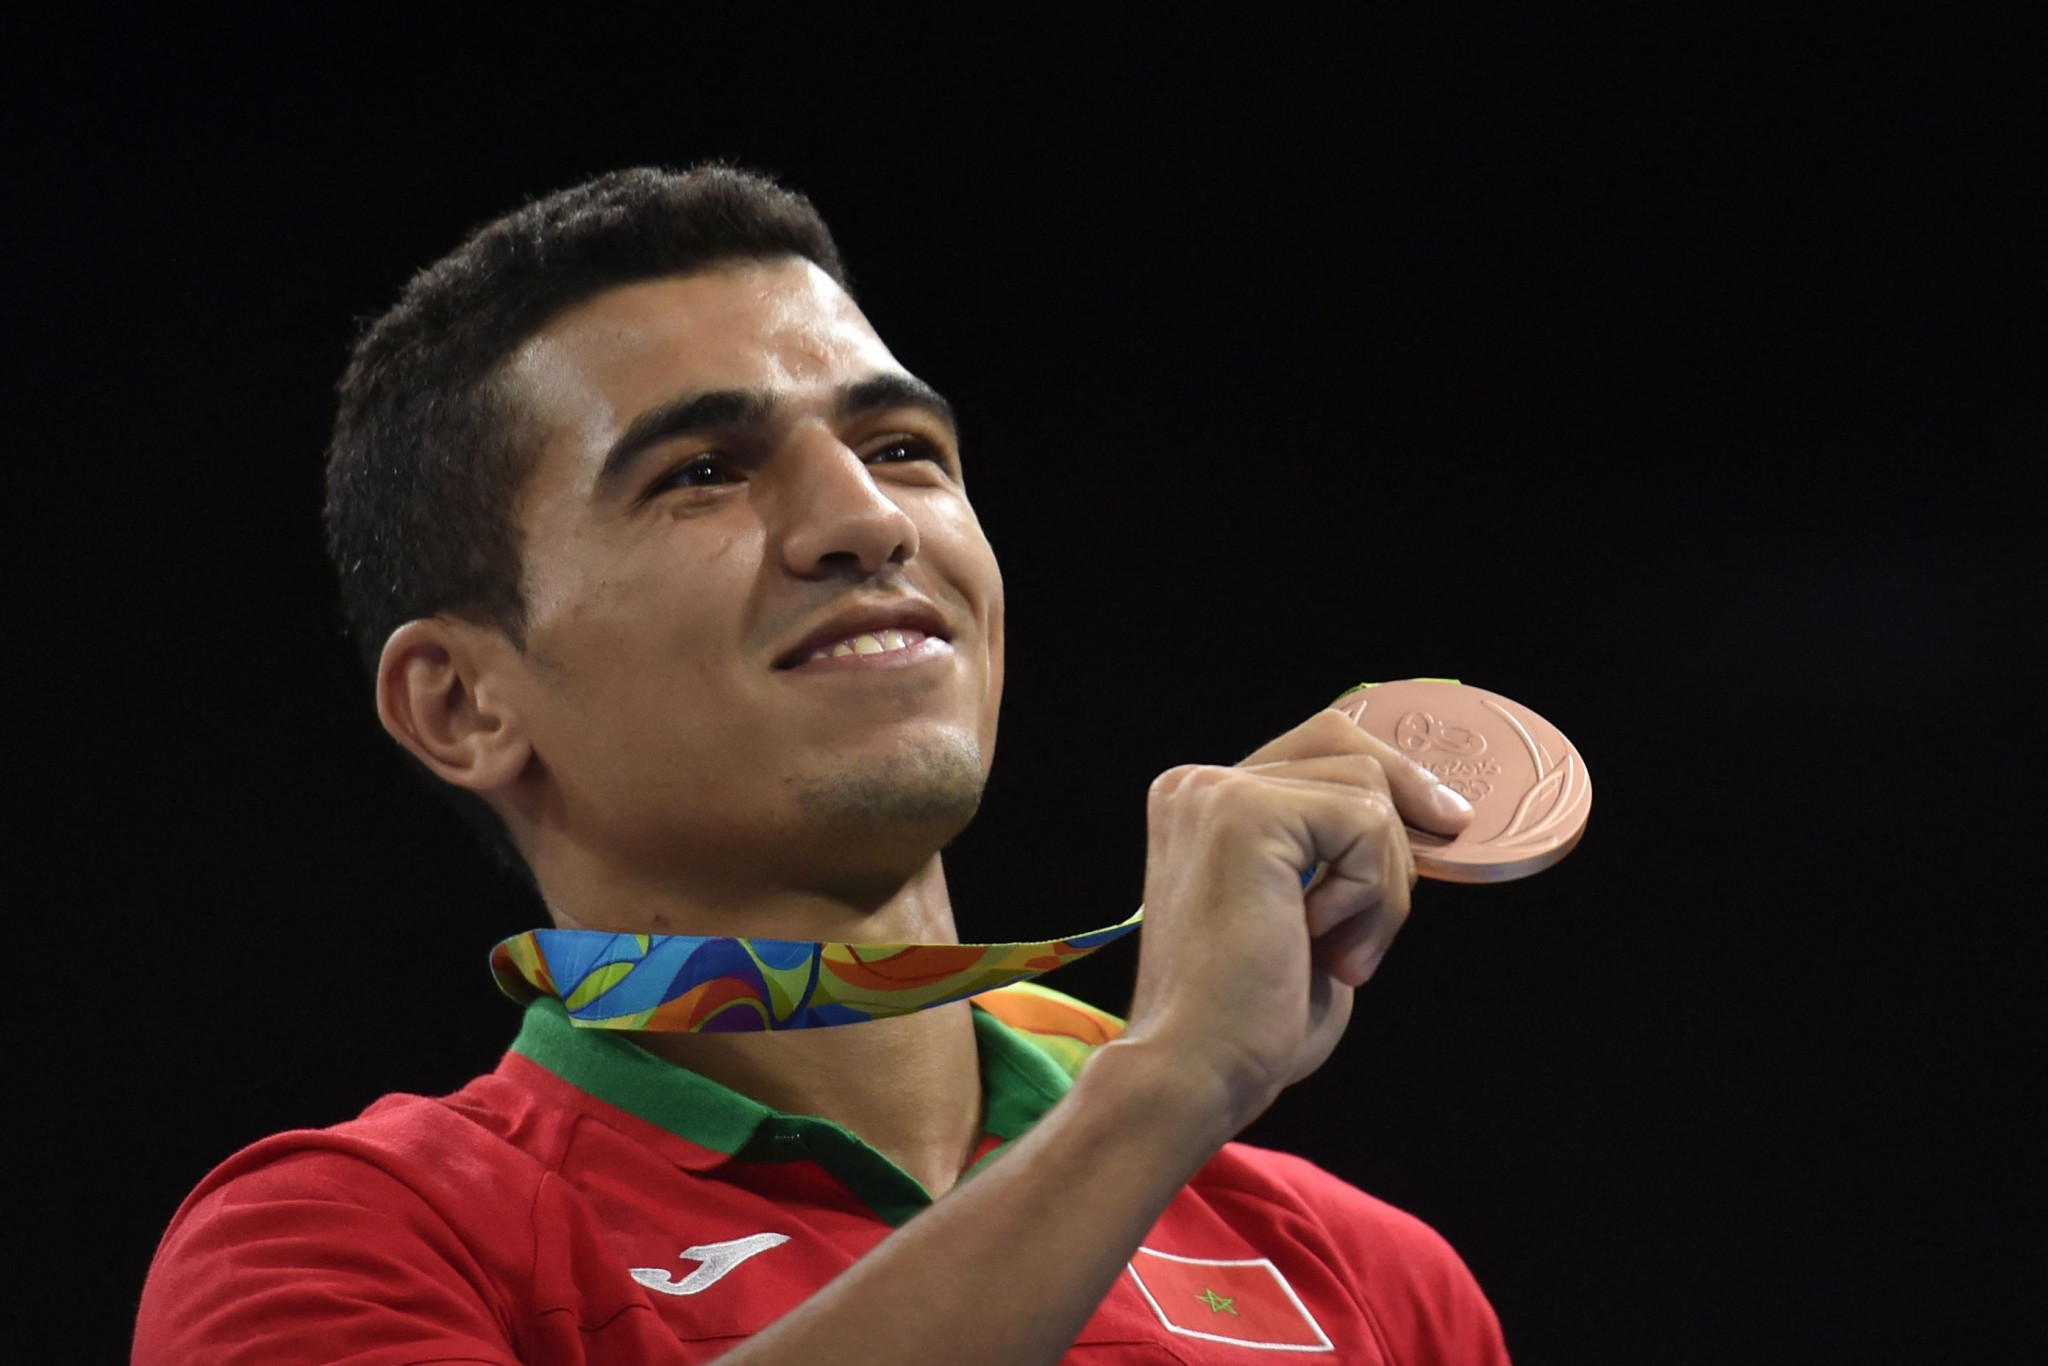 Rio 2016 bronze medallist Mohammed Rabii of Morocco is among the fighters due to compete at this year's African Boxing Championships ©Getty Images